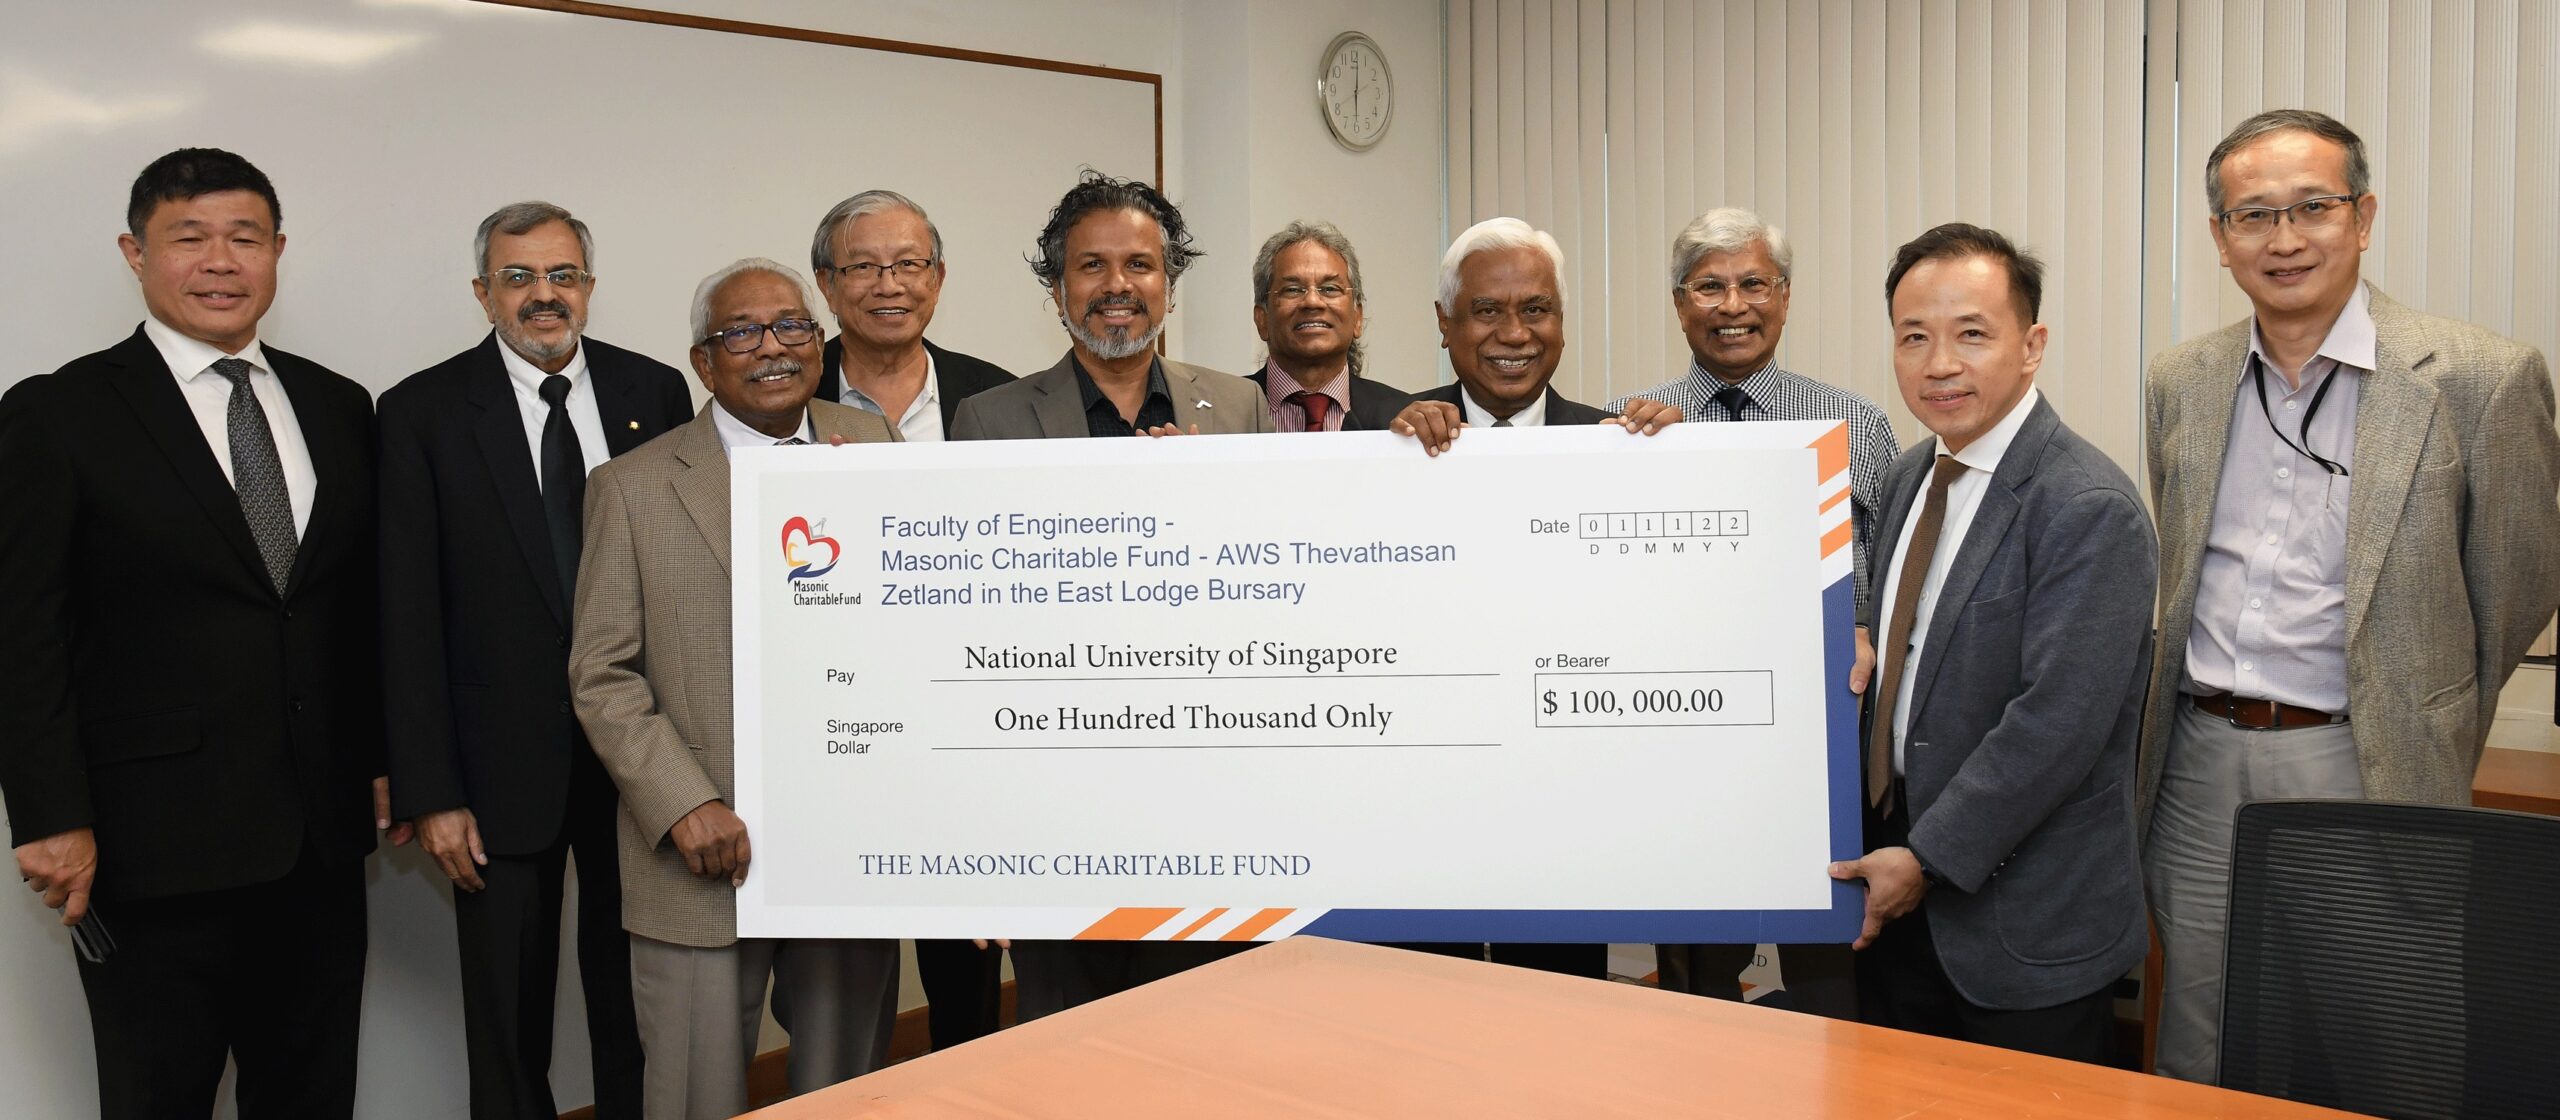 Dr Ivor Thevathasan, Dr Suresh B Babu, Dr Brian Shegar, together with AWS Thevathasan Family and Reps of Zetland in the East Lodge, presented the first cheque to CDE Dean Prof Aaron Thean on behalf of the MCF.